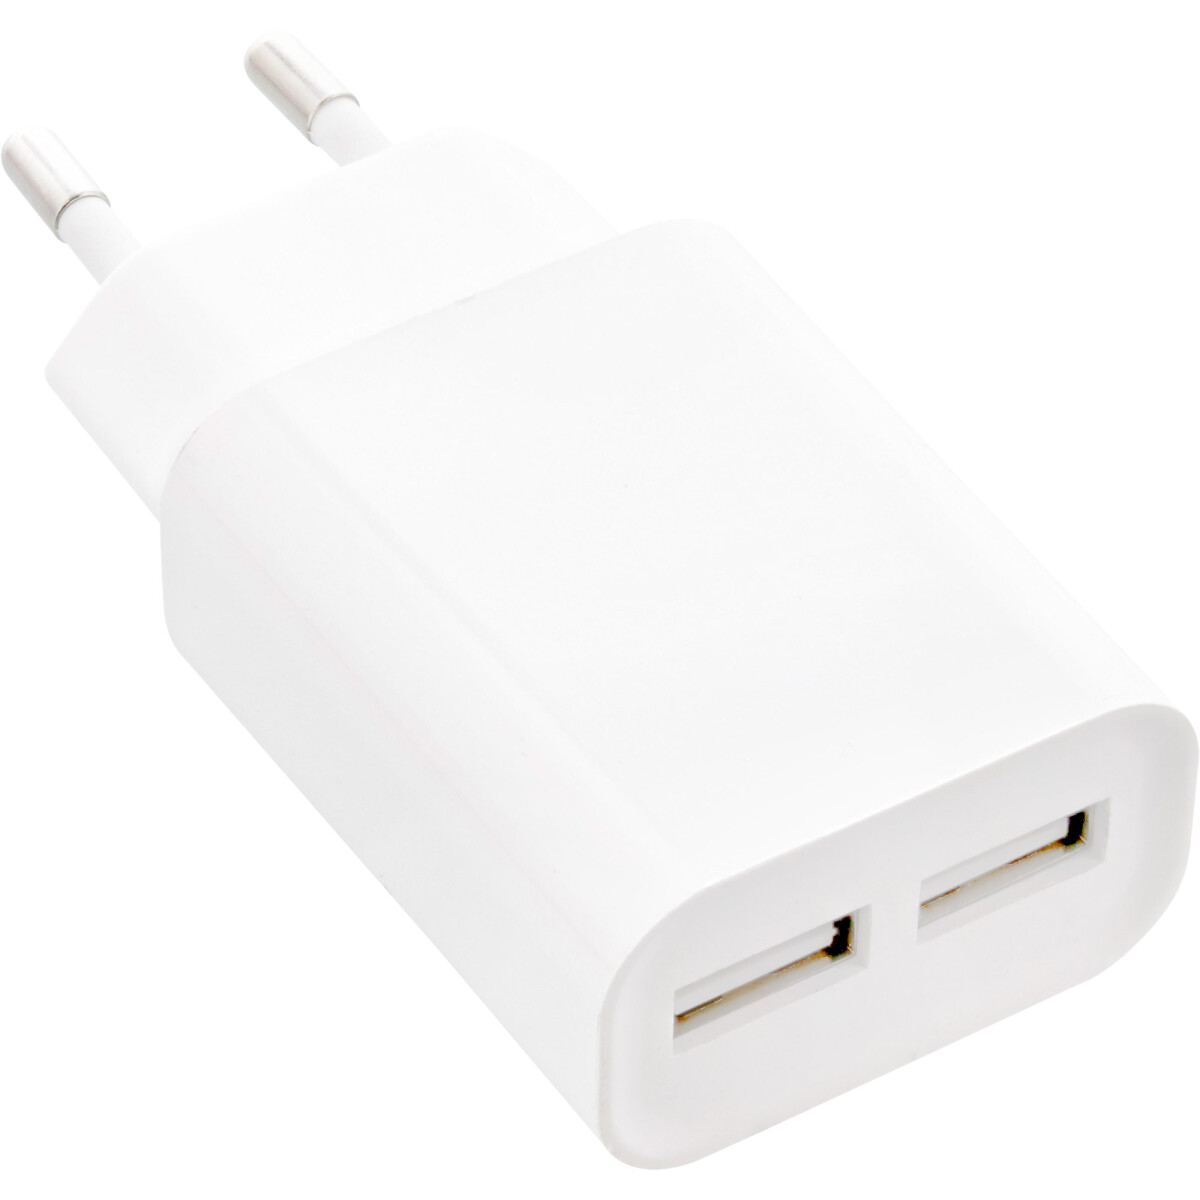 InLine® USB Power Adapter DUO, 2 Port 100-240VAC to...